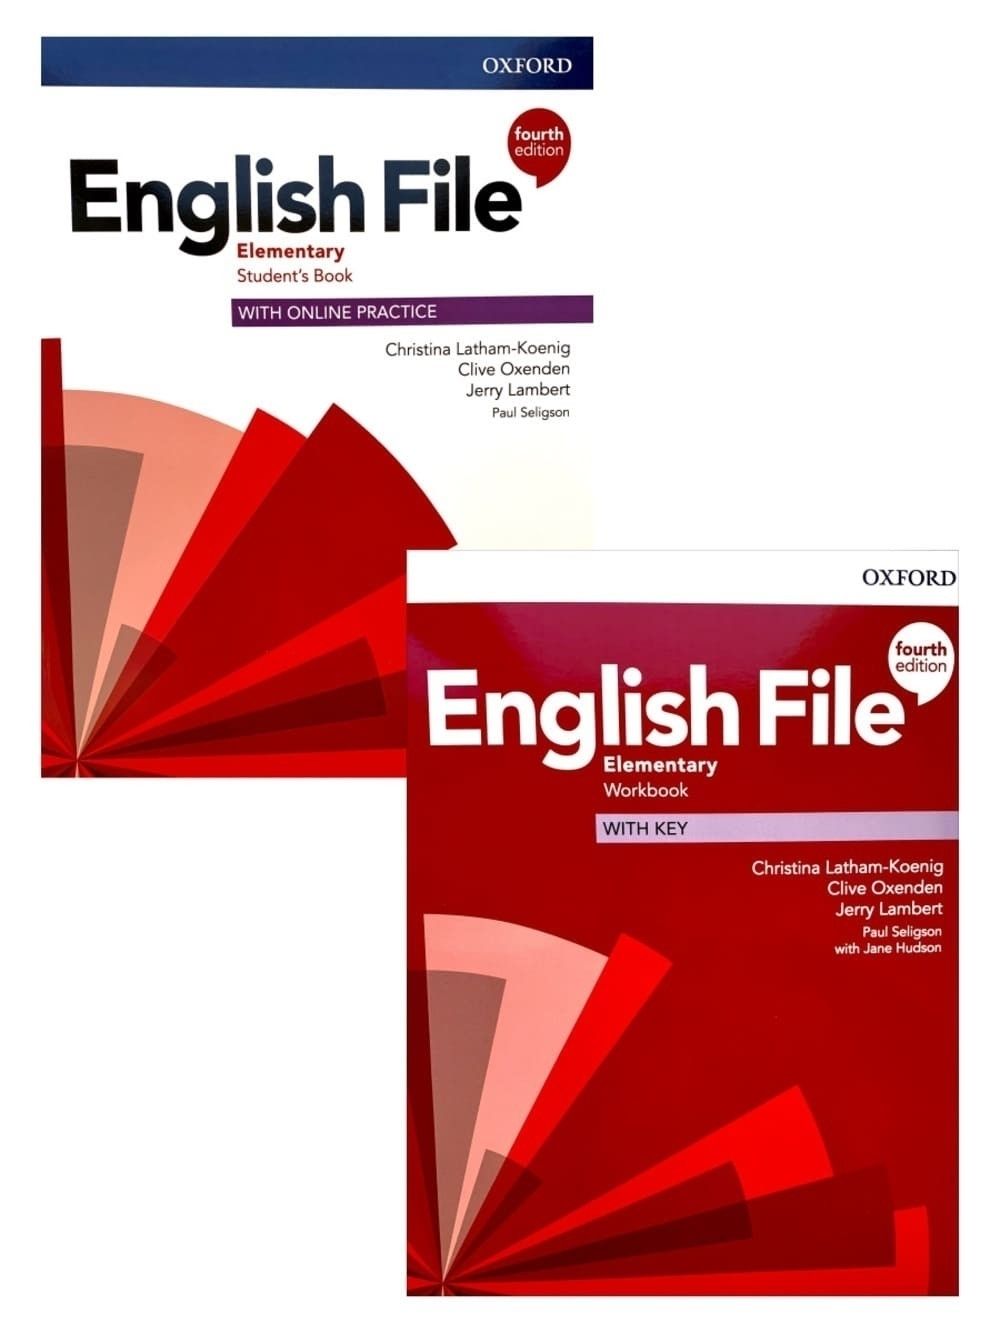 New English file Proficiency. Cambridge 18. Cambridge IELTS реклама. Book Cover for English students download. English file elementary 4